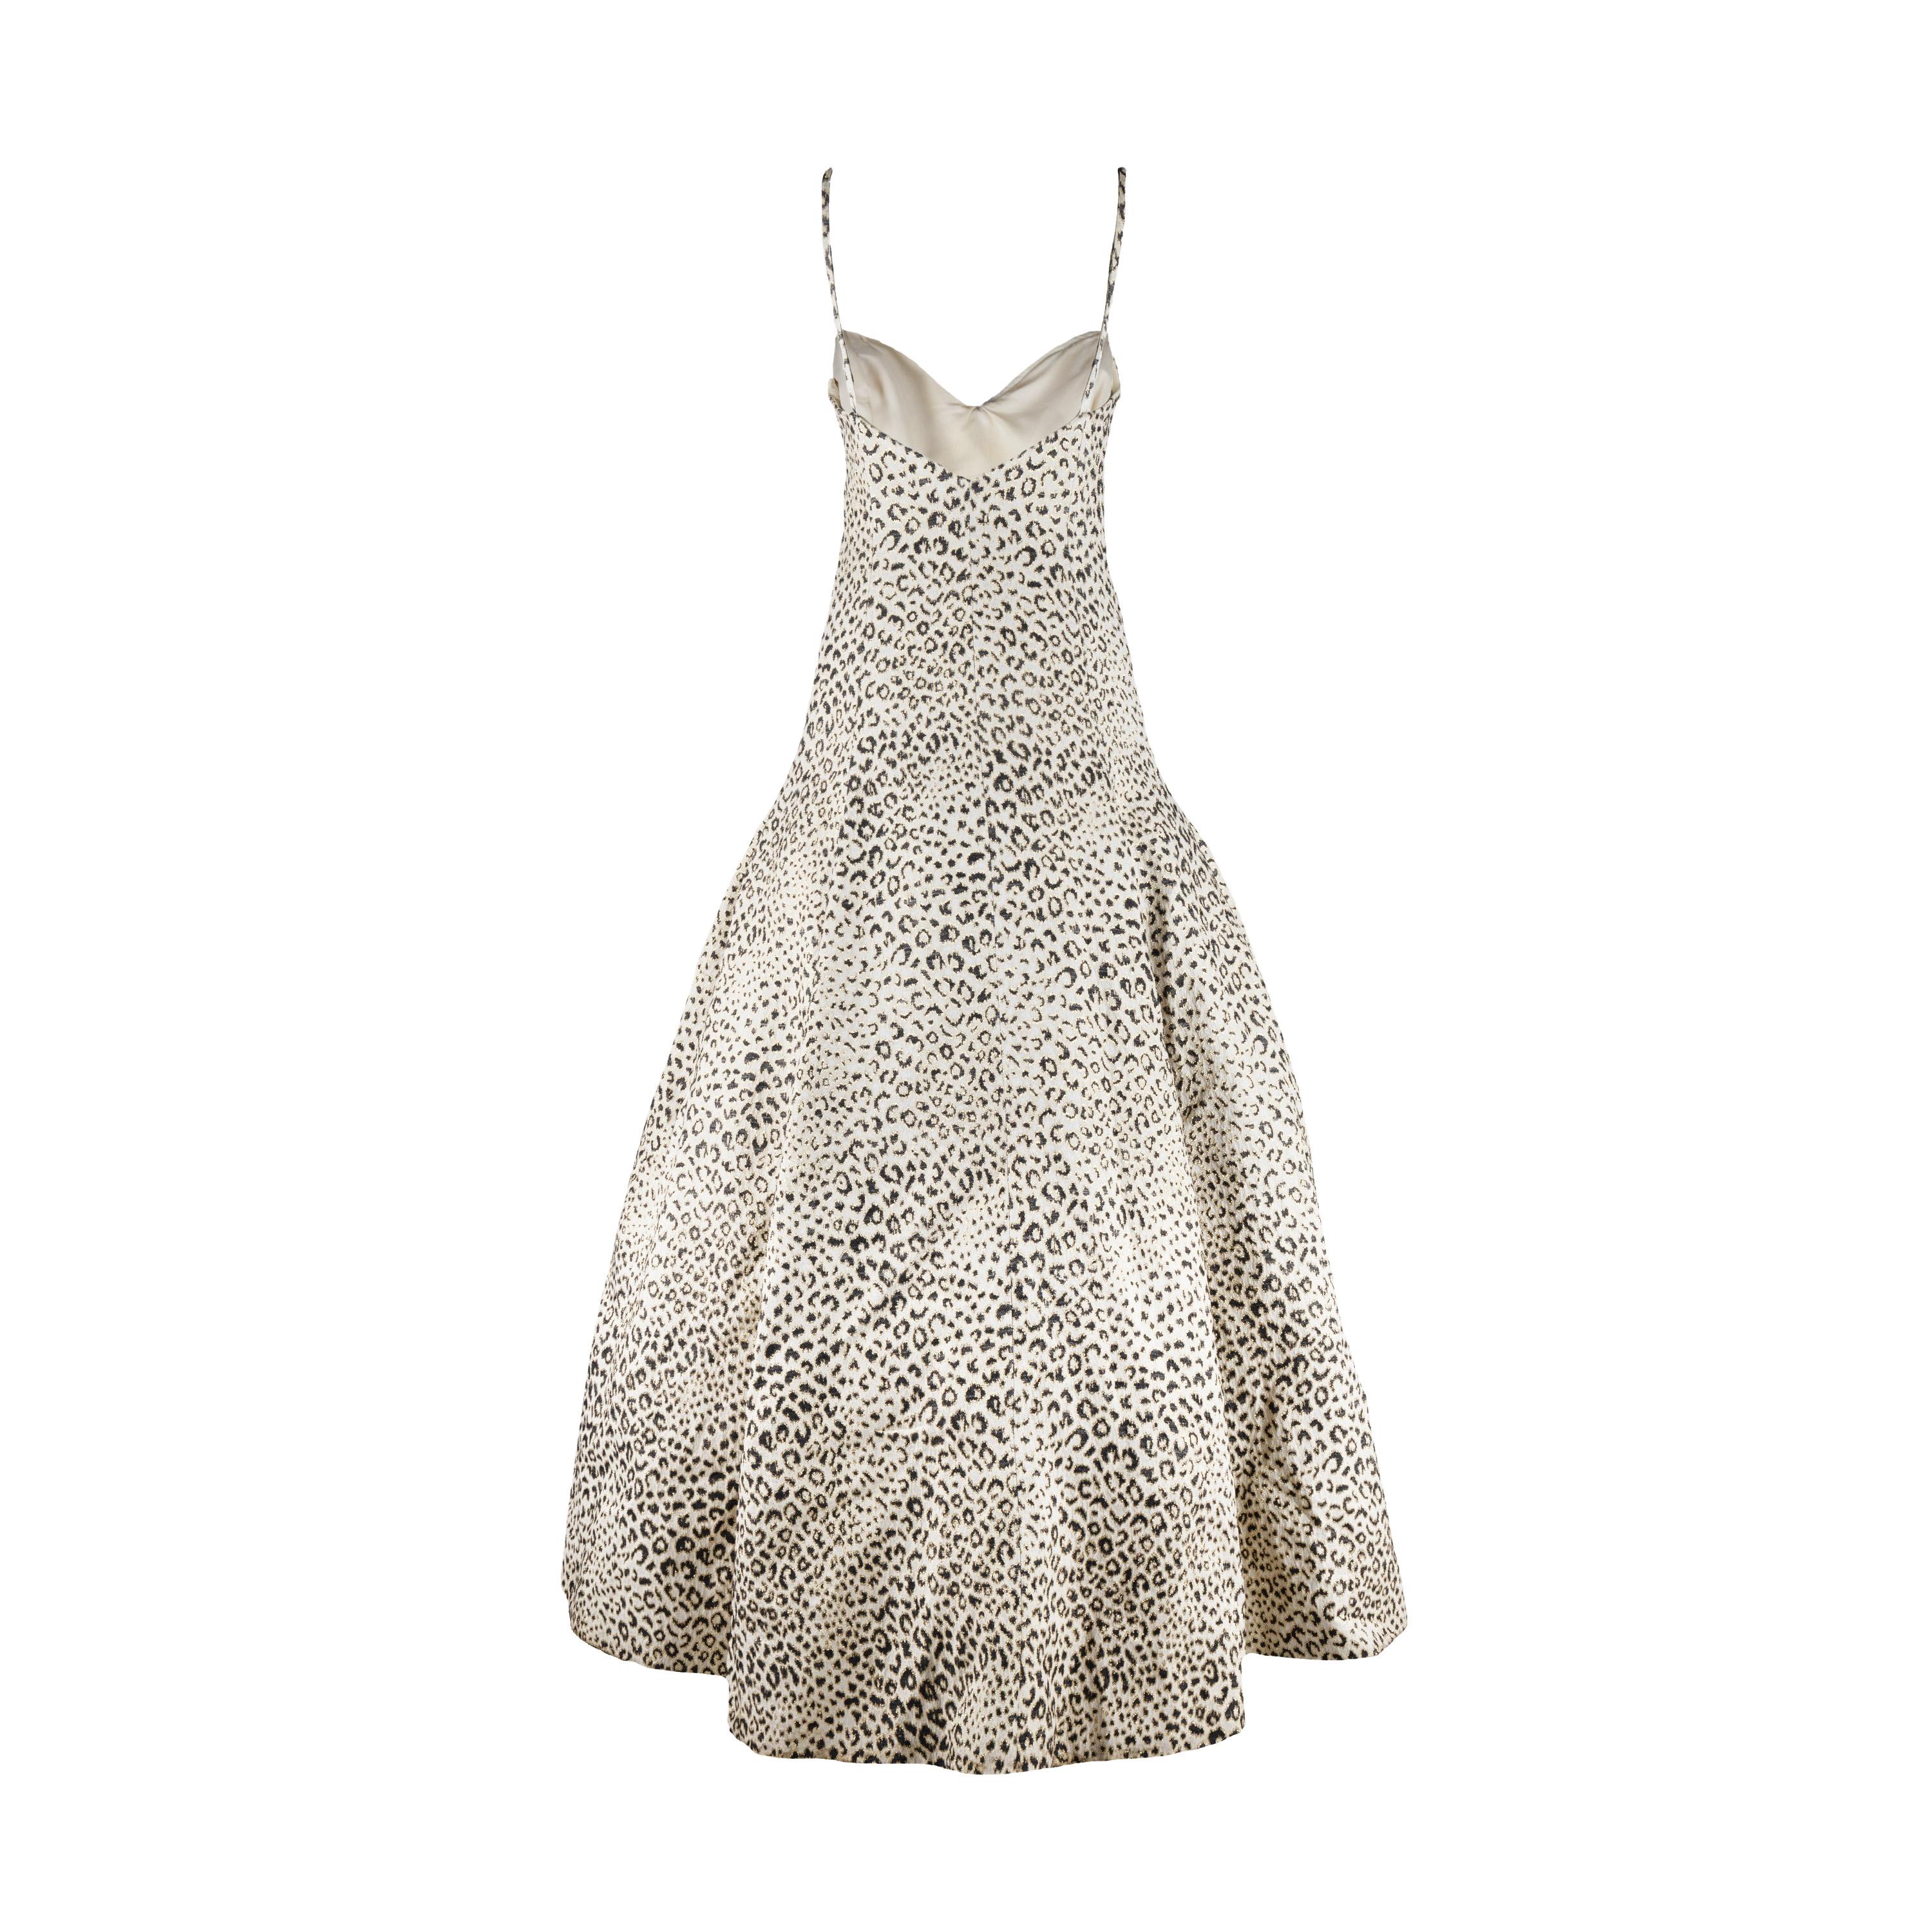 A statement-making piece from the Valentino Fall/Winter 1992 collection, this leopard printed ball gown is the ultimate vintage piece. The sweetheart neckline and fitted silhouette flatter the figure, while the side zipper closure and double lining